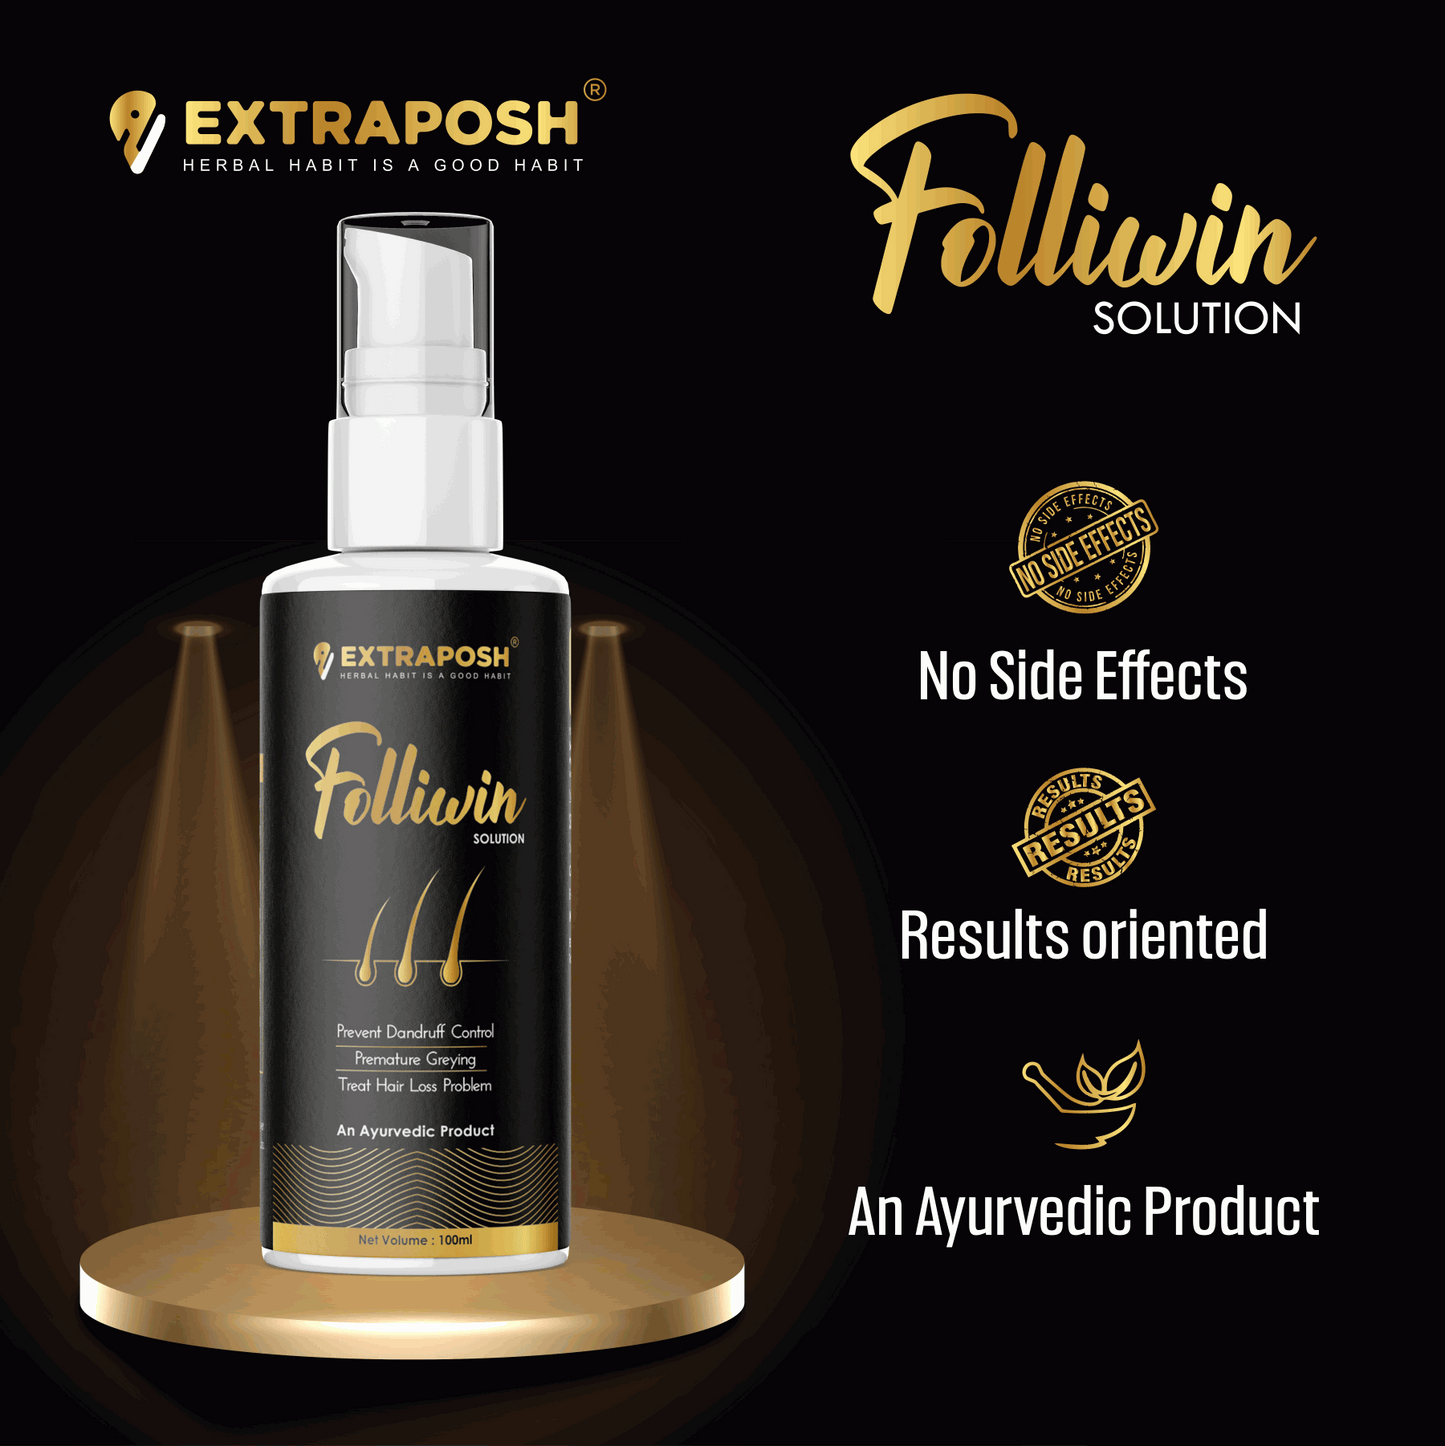 Extraposh Folliwin Hair Solution is An Ayurvedic Product with No Side Effects Results Oriented